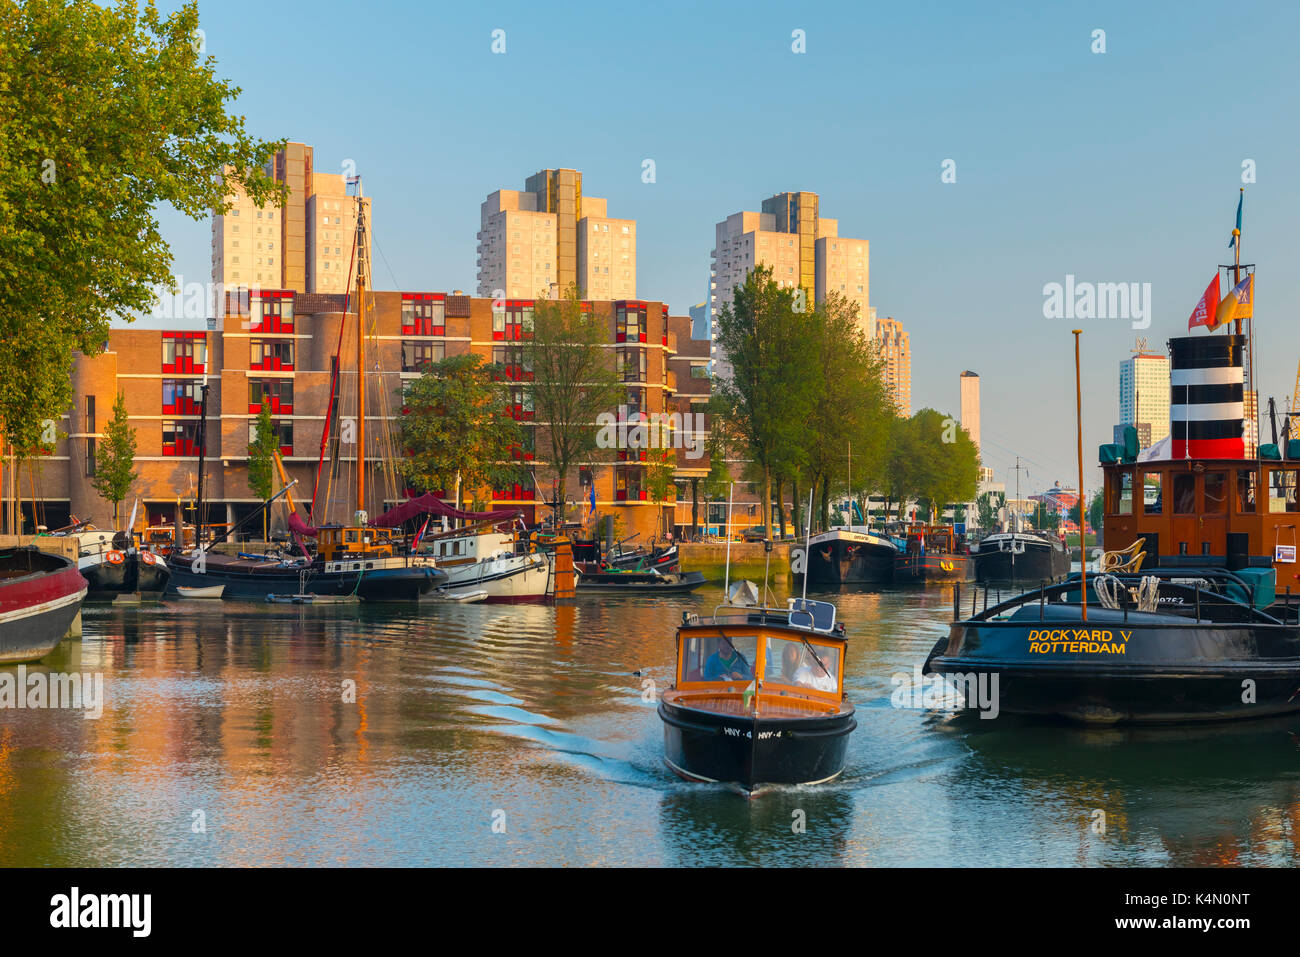 Boat, Havenmuseum, Leuvehaven, Rotterdam, South Holland, The Netherlands, Europe Stock Photo